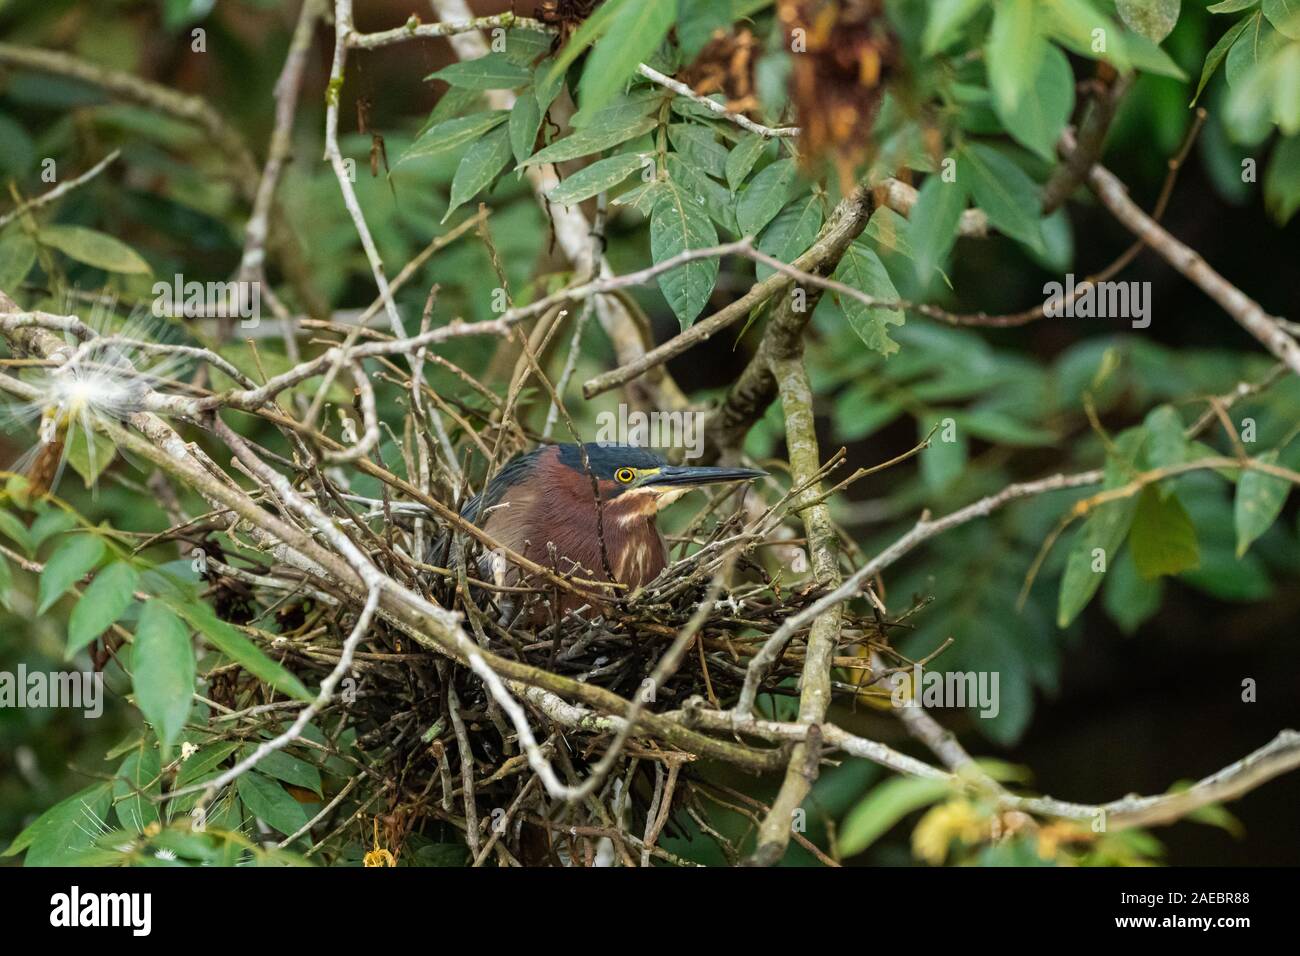 Green heron (Butorides virescens) in its nest. This bird is found in wetlands from southern Canada to northern South America. Like all herons, it uses Stock Photo